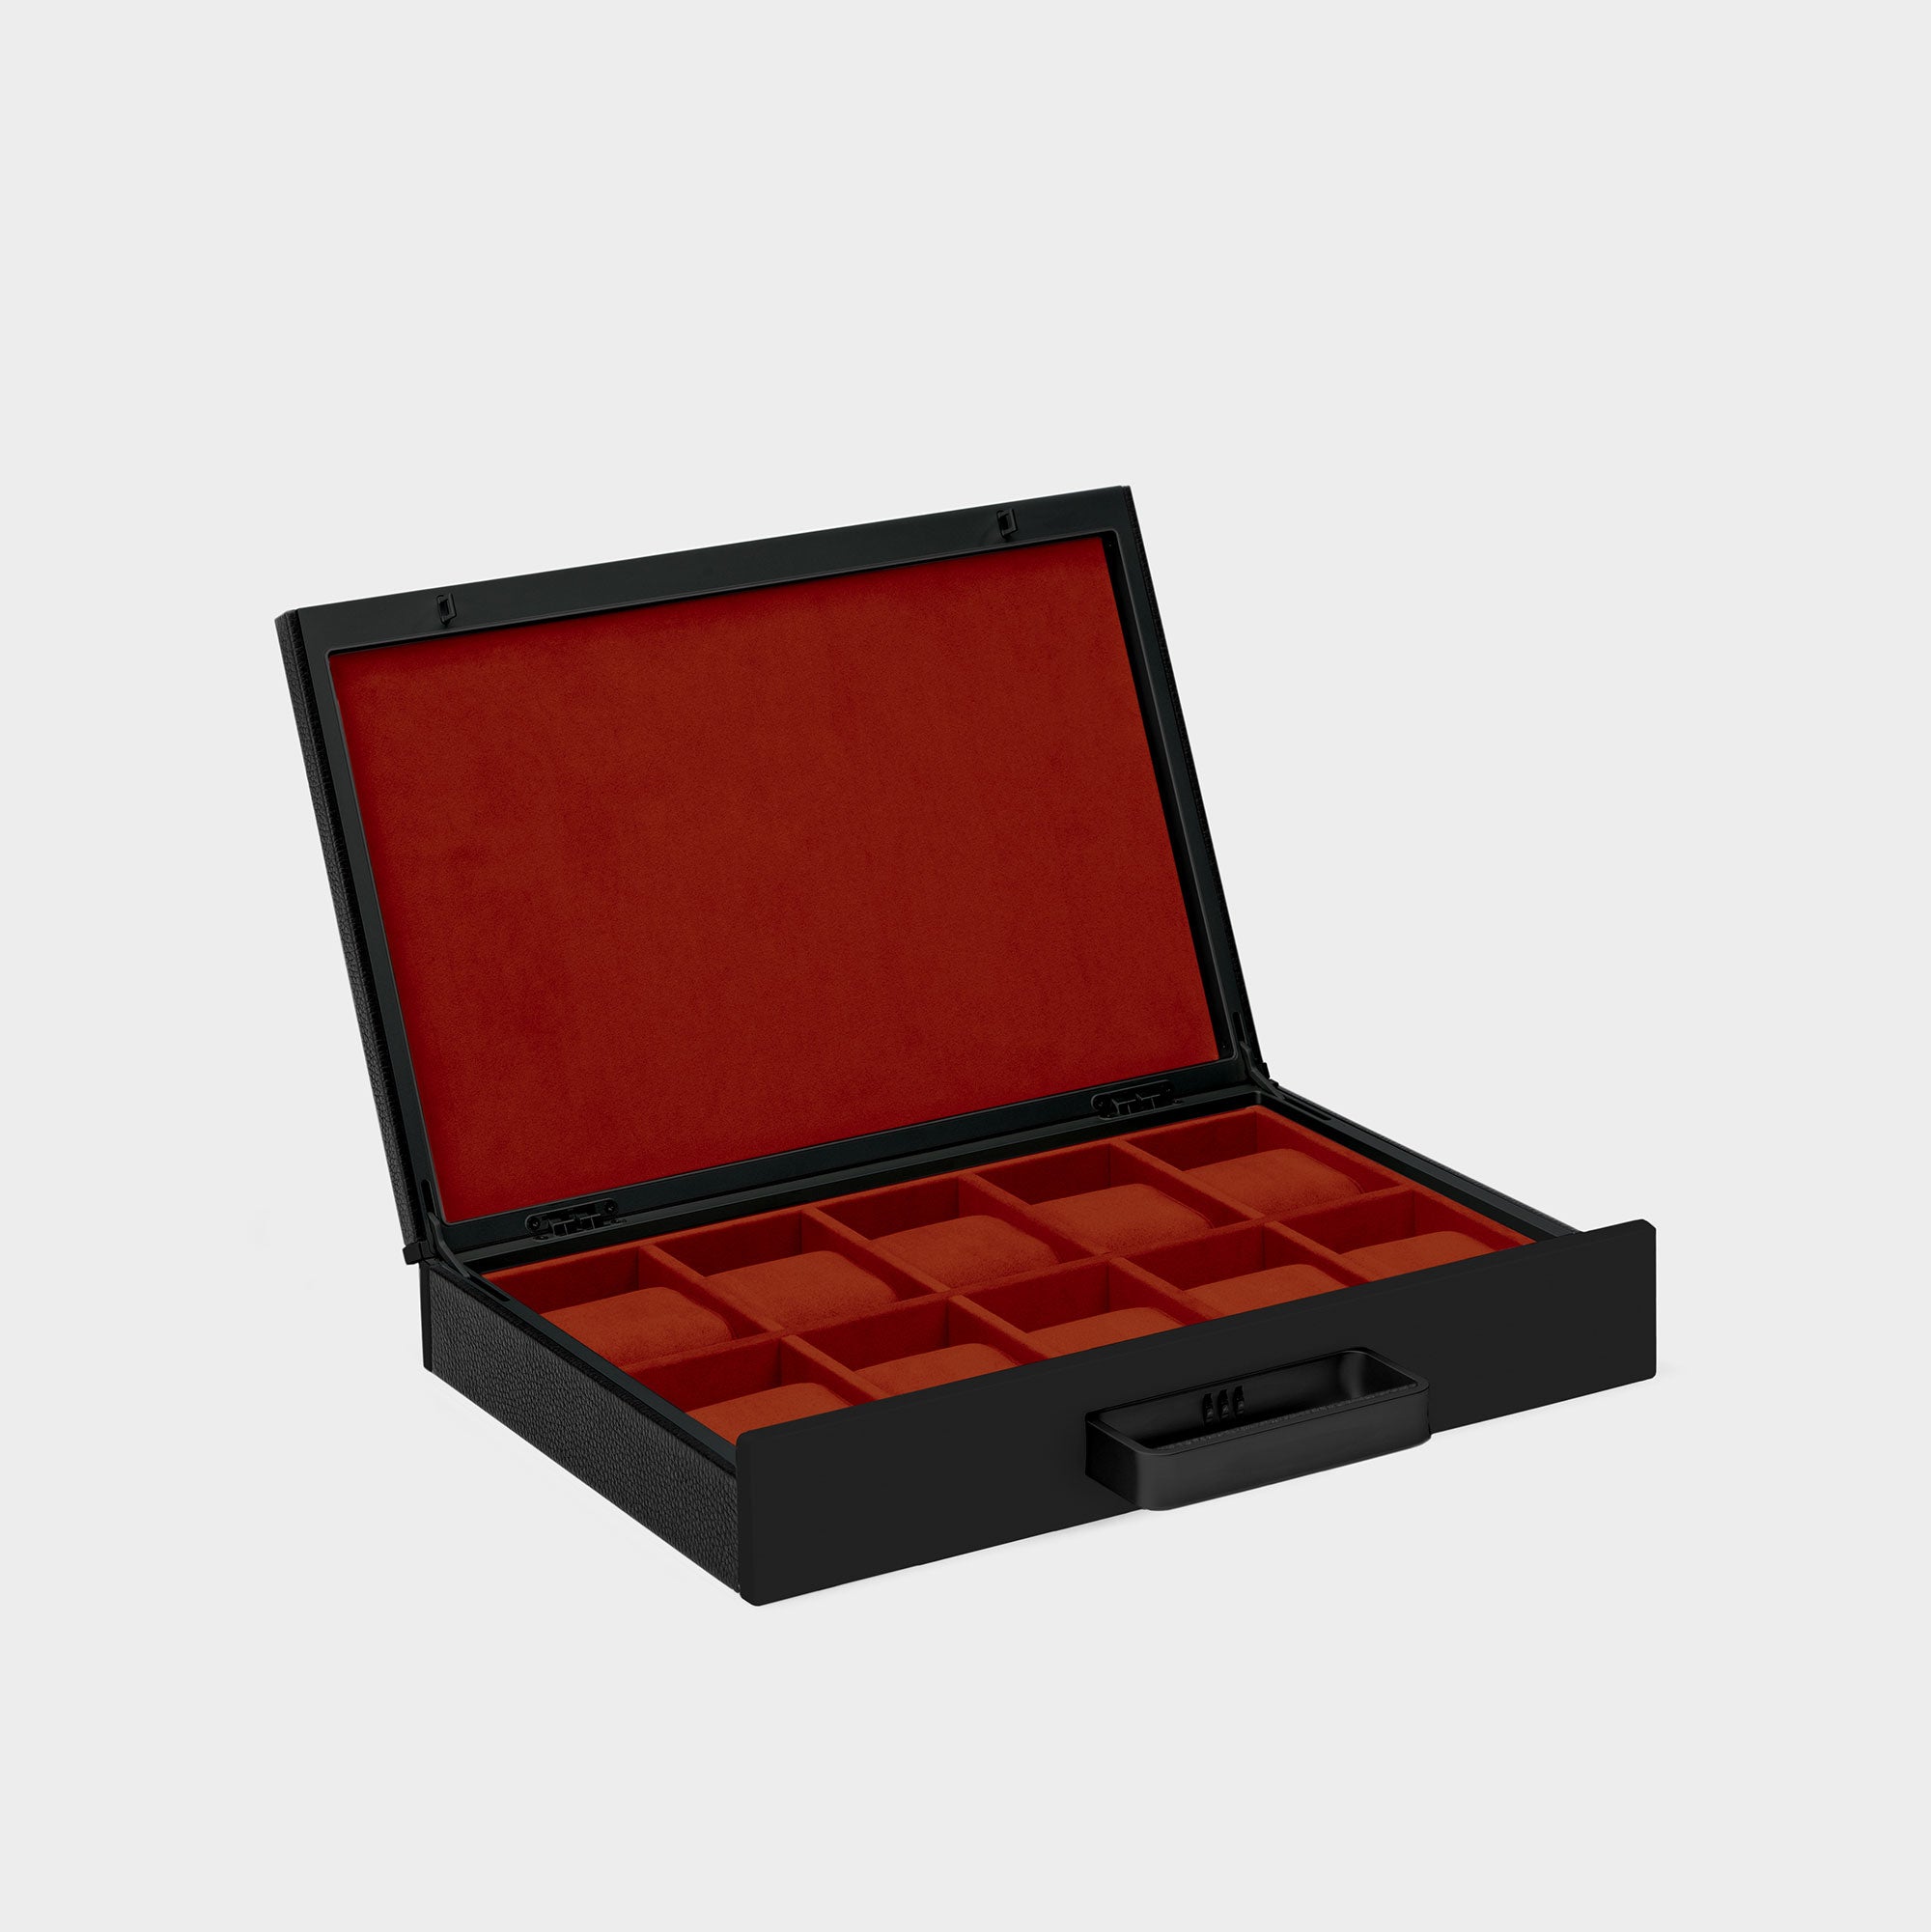 Charles Simon Mackenzie 10 watch briefcase in all black with Vermilion red interior made from fine leather, aluminum and carbon fiber casing and soft Alcantara interior lining